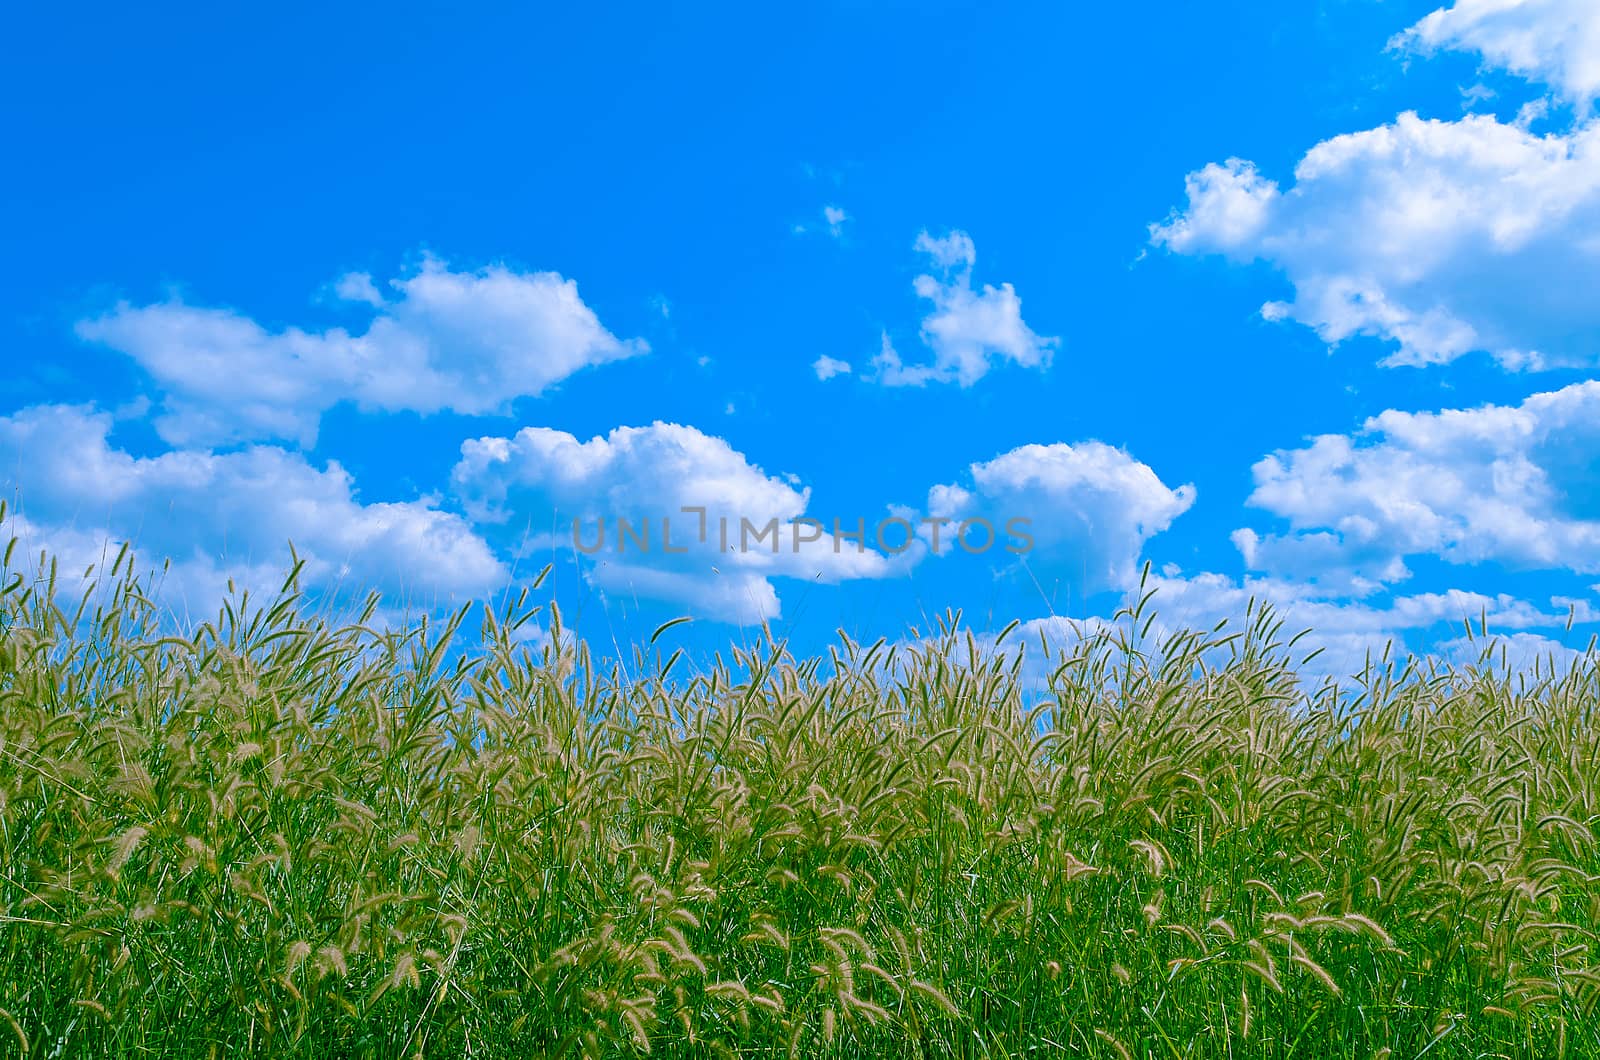 The Grass Pollen and Cloudy Blue Sky.